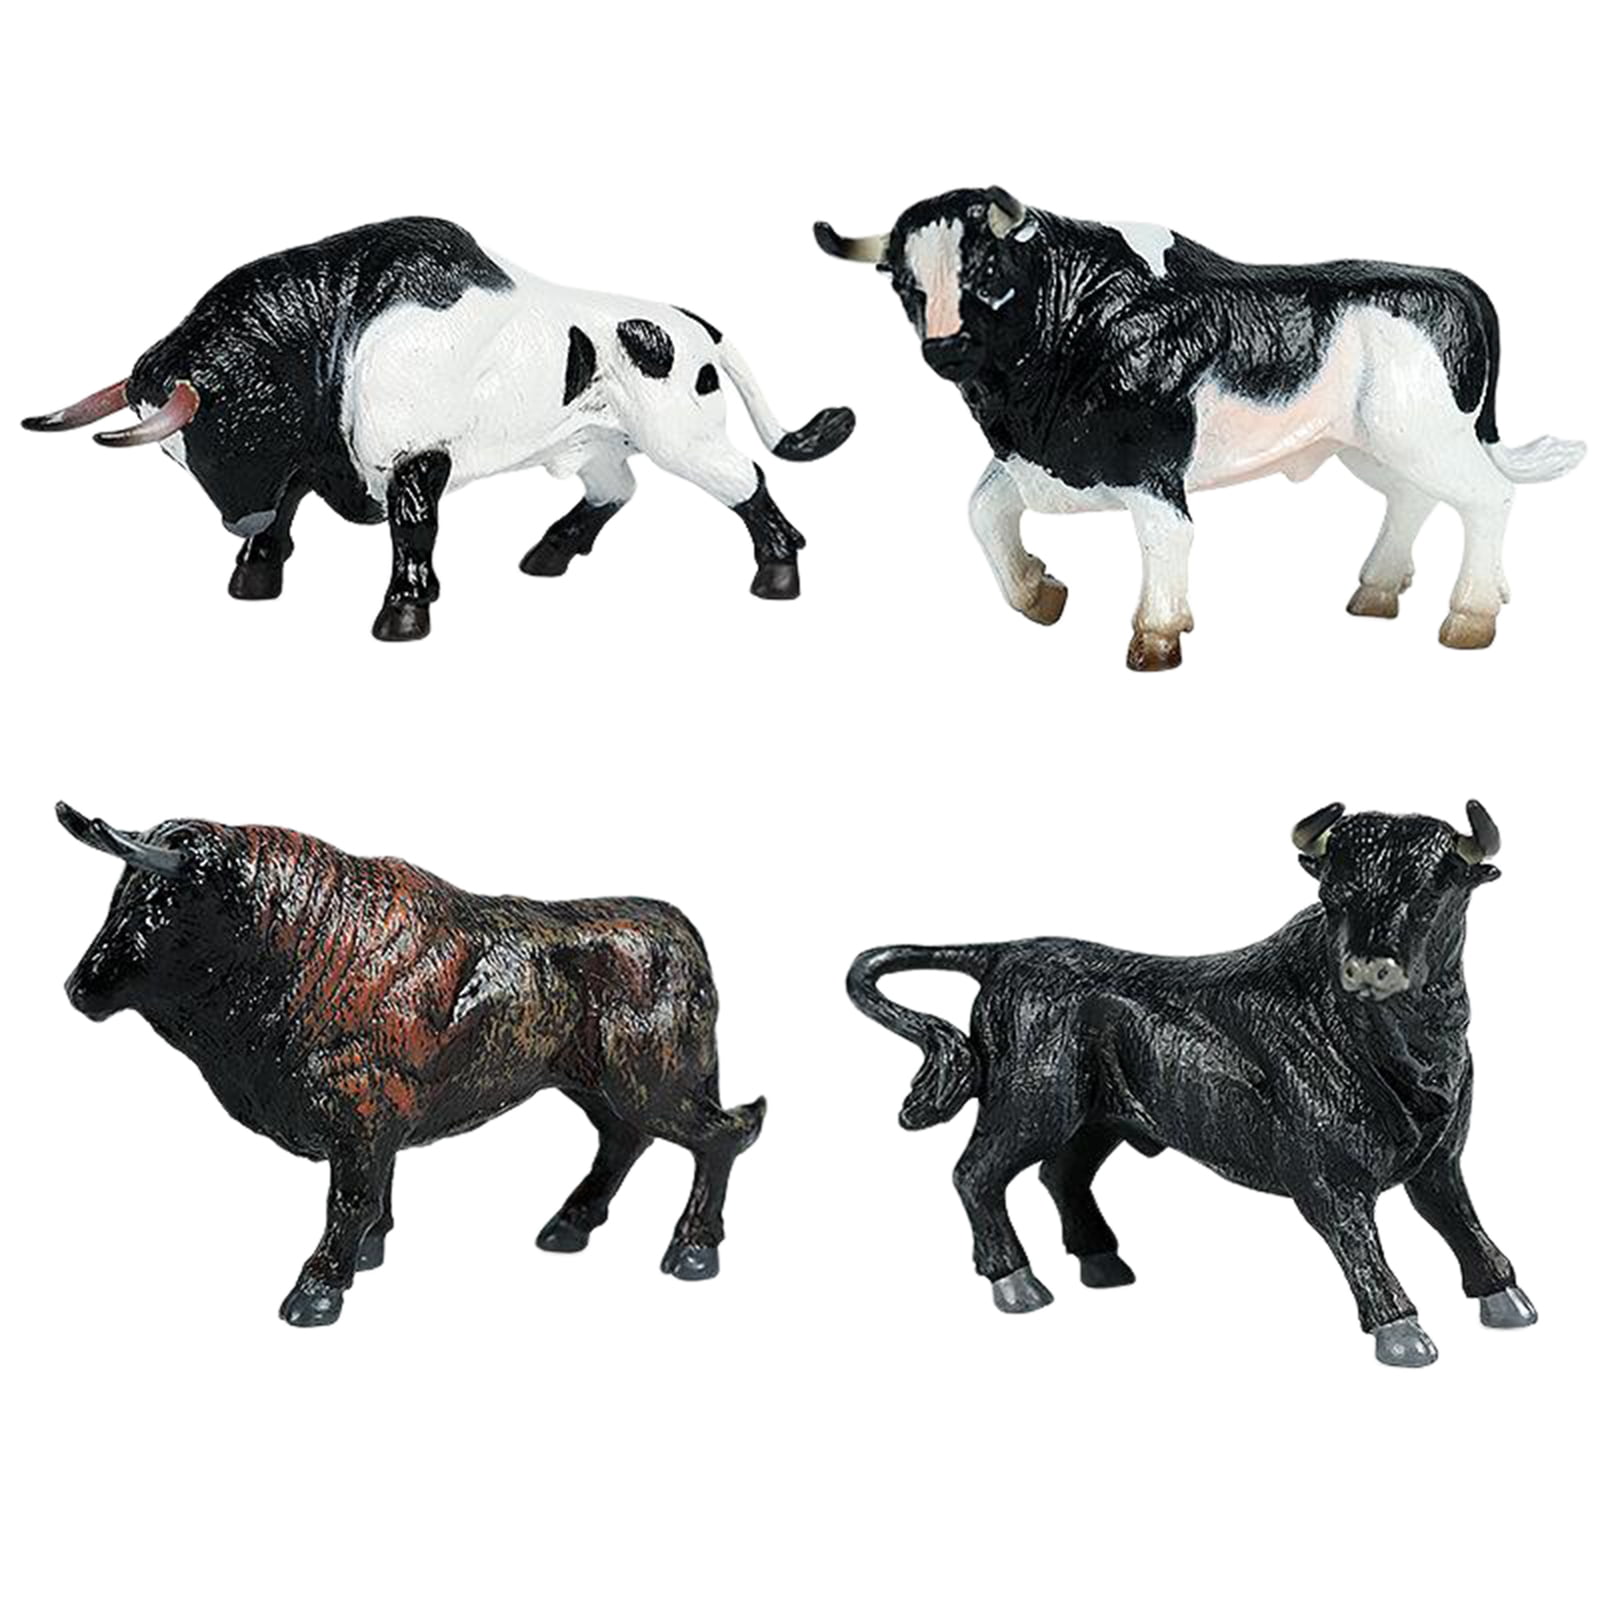 Details about   4pcs Cattle Model Toy Simulation Animal Home Bedroom Kids Room Decoration 